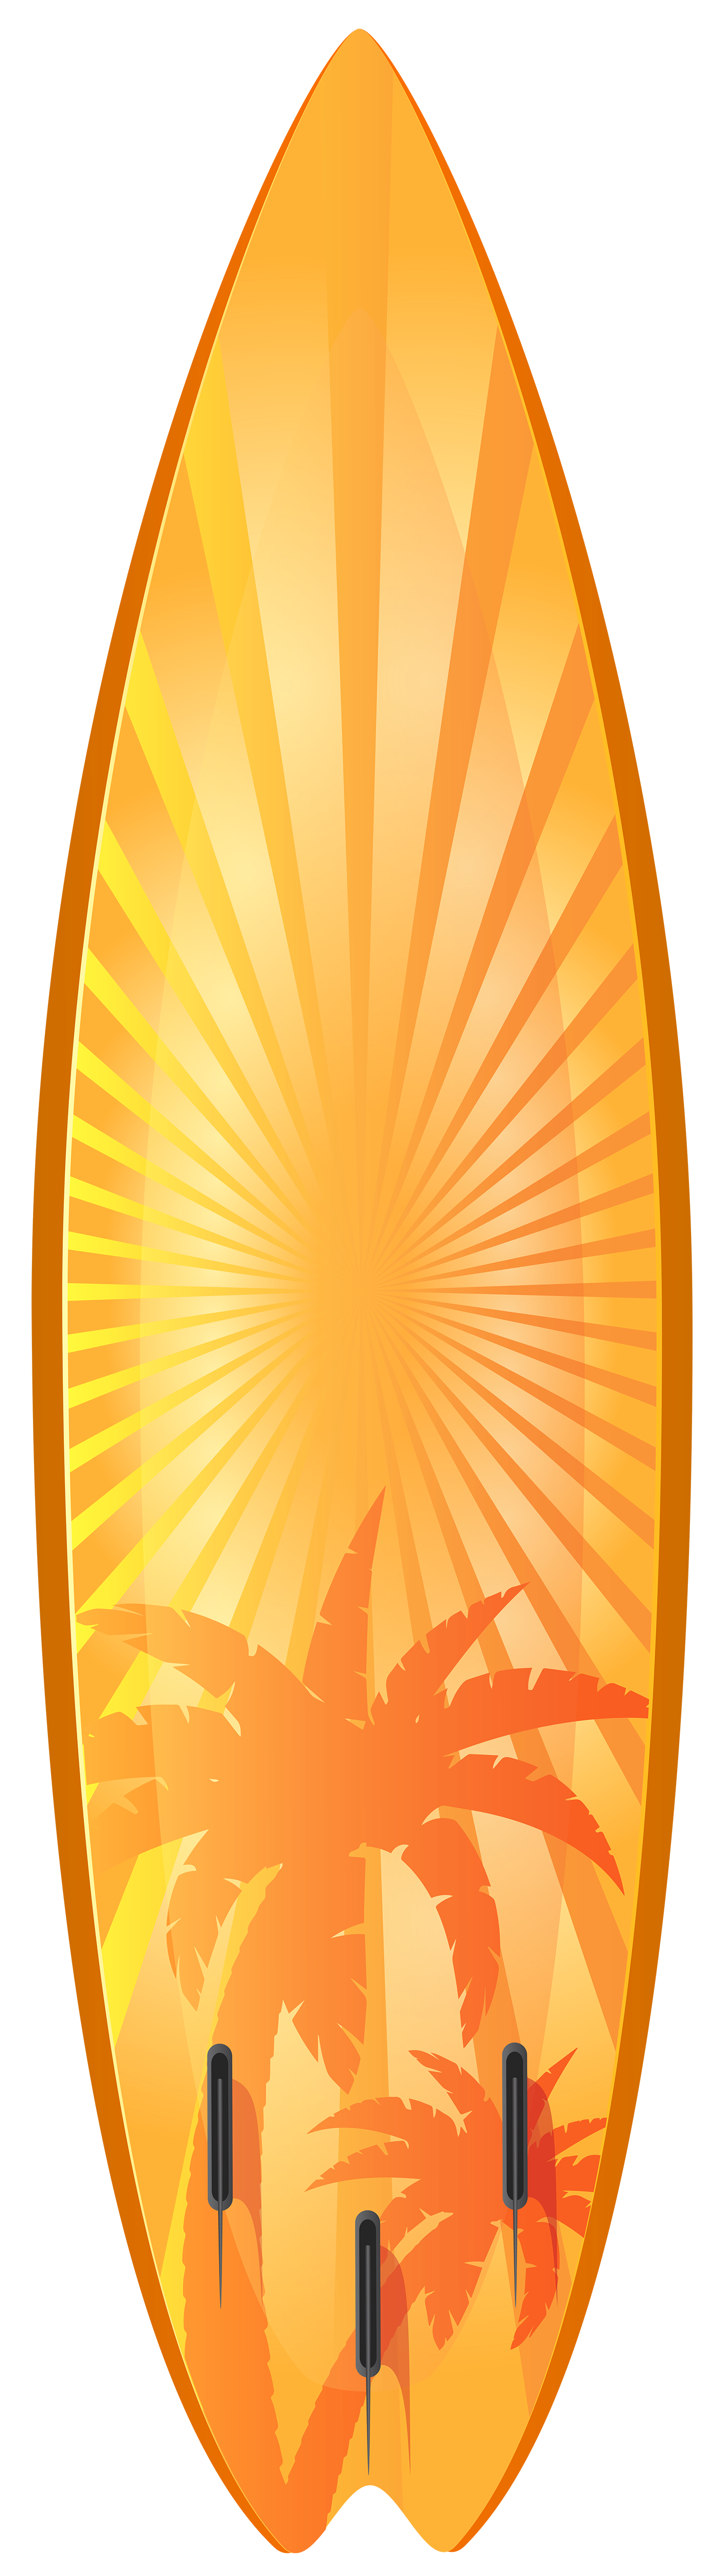 Orange Surfboard With Palm Trees Transparent Clip Art Image - Surfboard, Transparent background PNG HD thumbnail